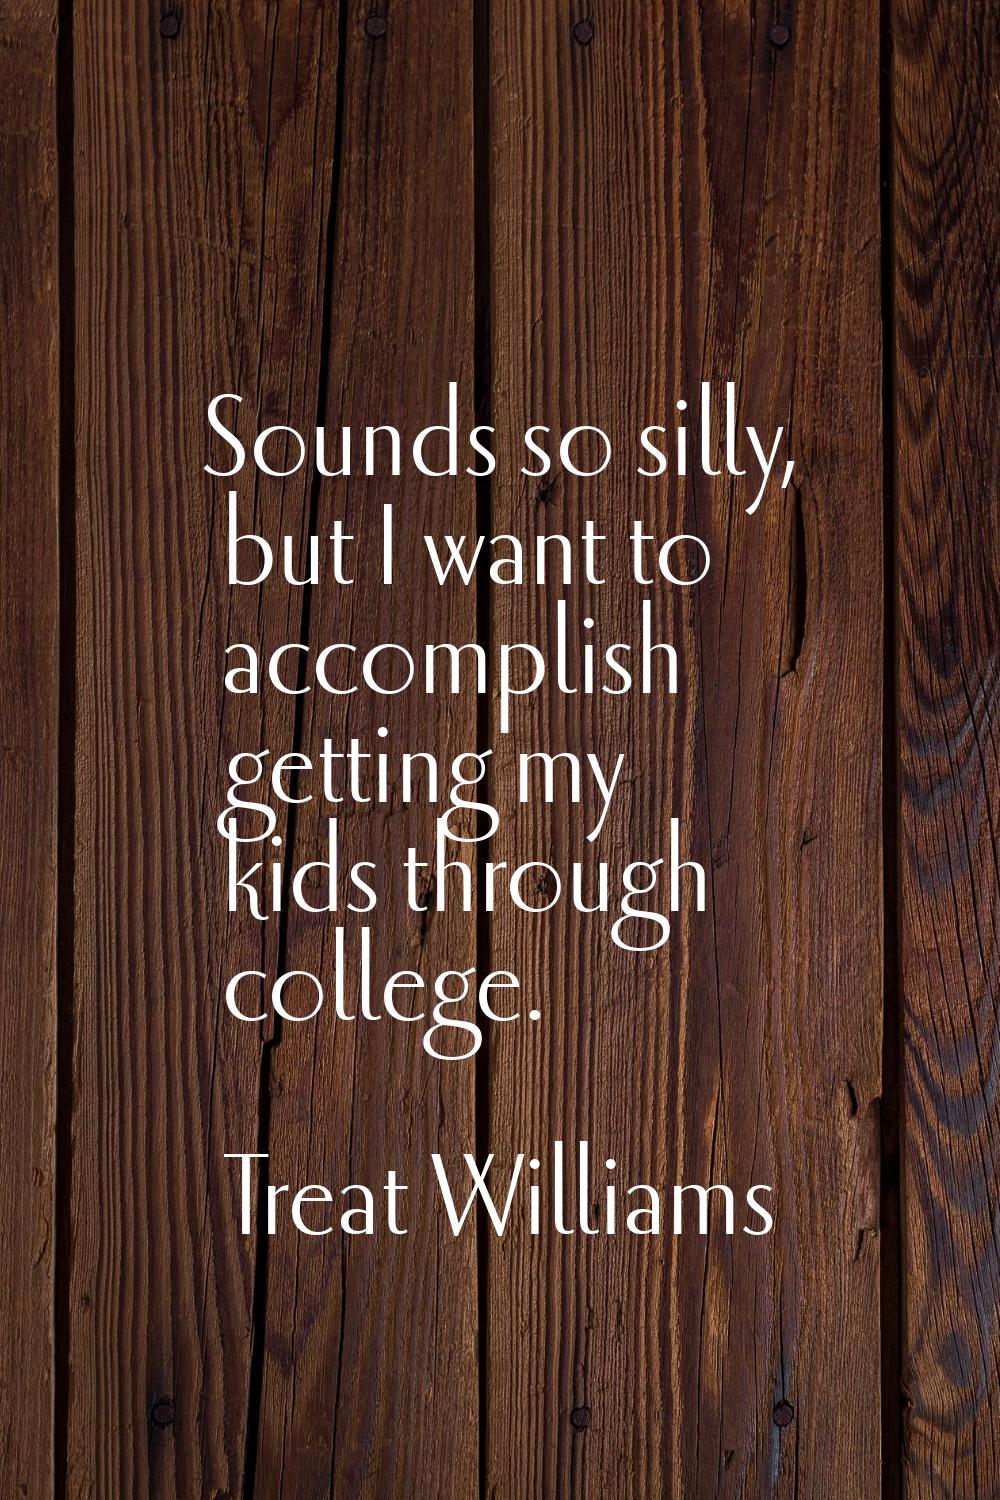 Sounds so silly, but I want to accomplish getting my kids through college.